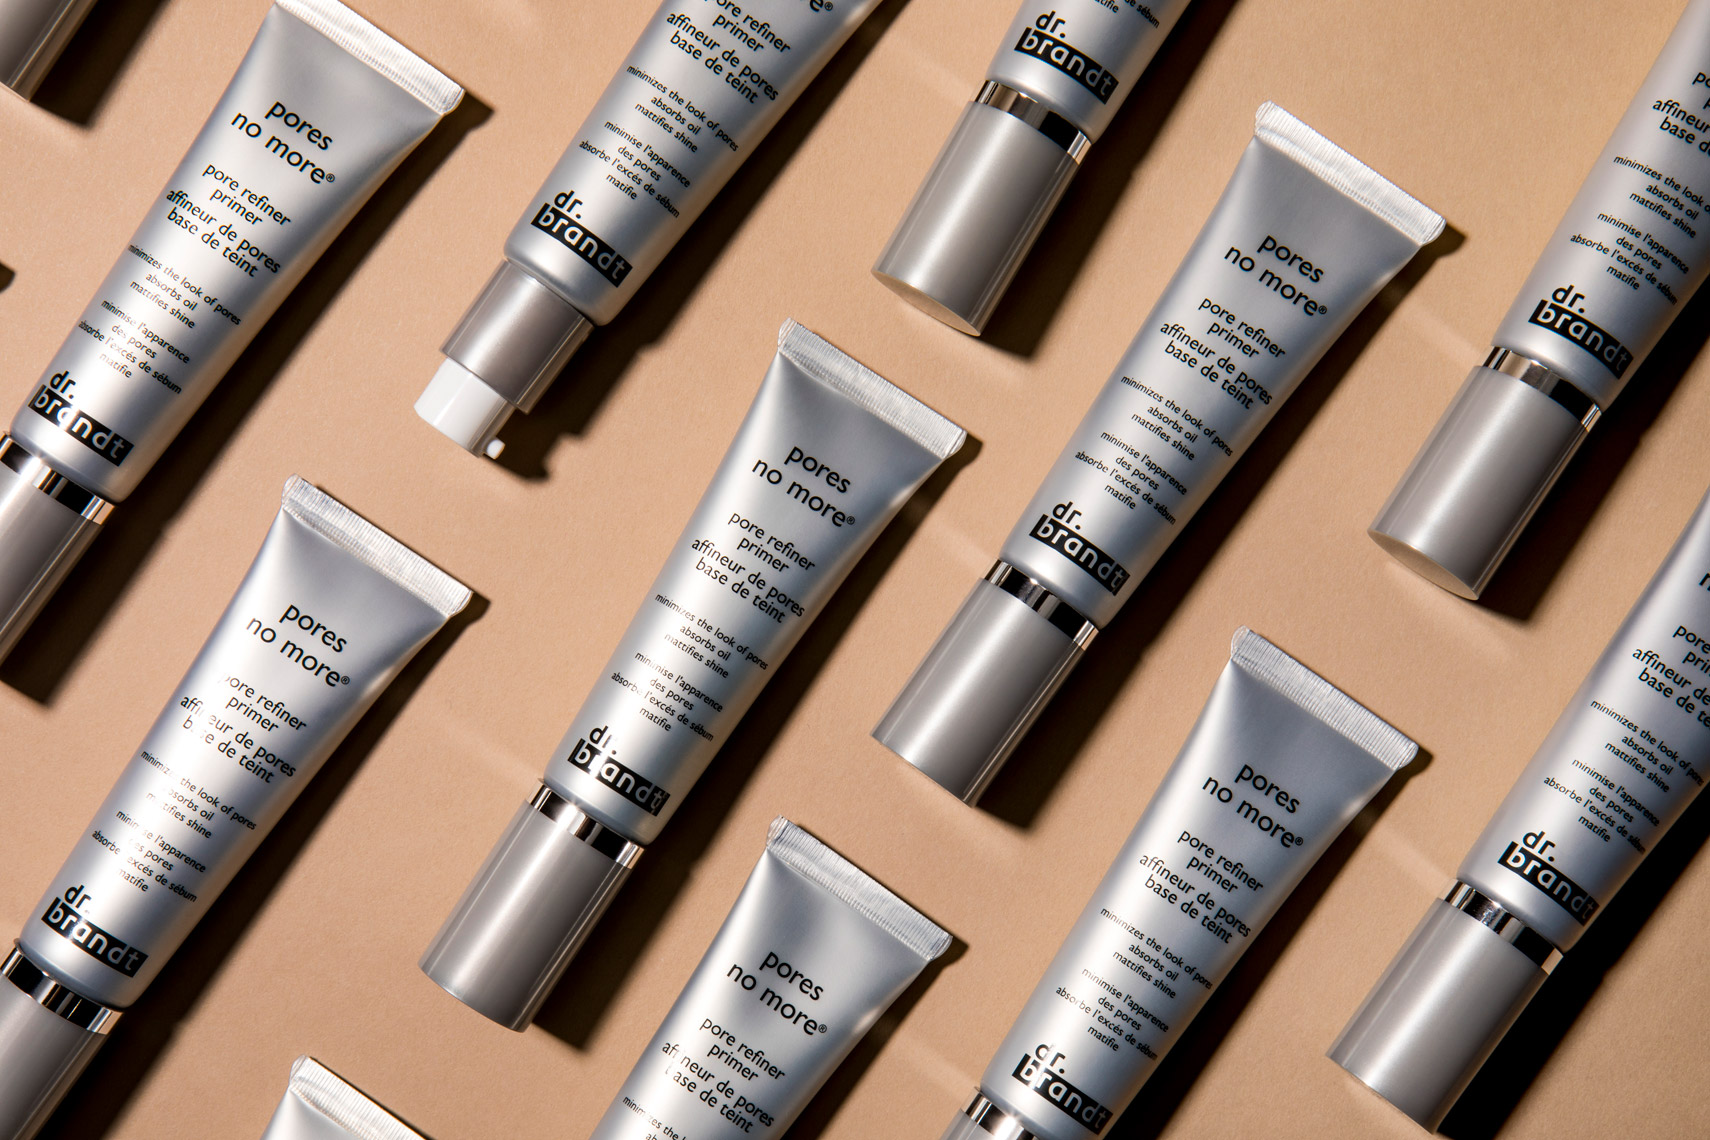 Pore Refining Primer, Dr. Brandt, Skincare, Skincare Photography, Product Photography, Makeup, Cosmetics, Makeup Photography, Cosmetic Photography, Creative Still, still life, product photography, product photo, studio photography, Ian Jacob, Ian Jacob Photography